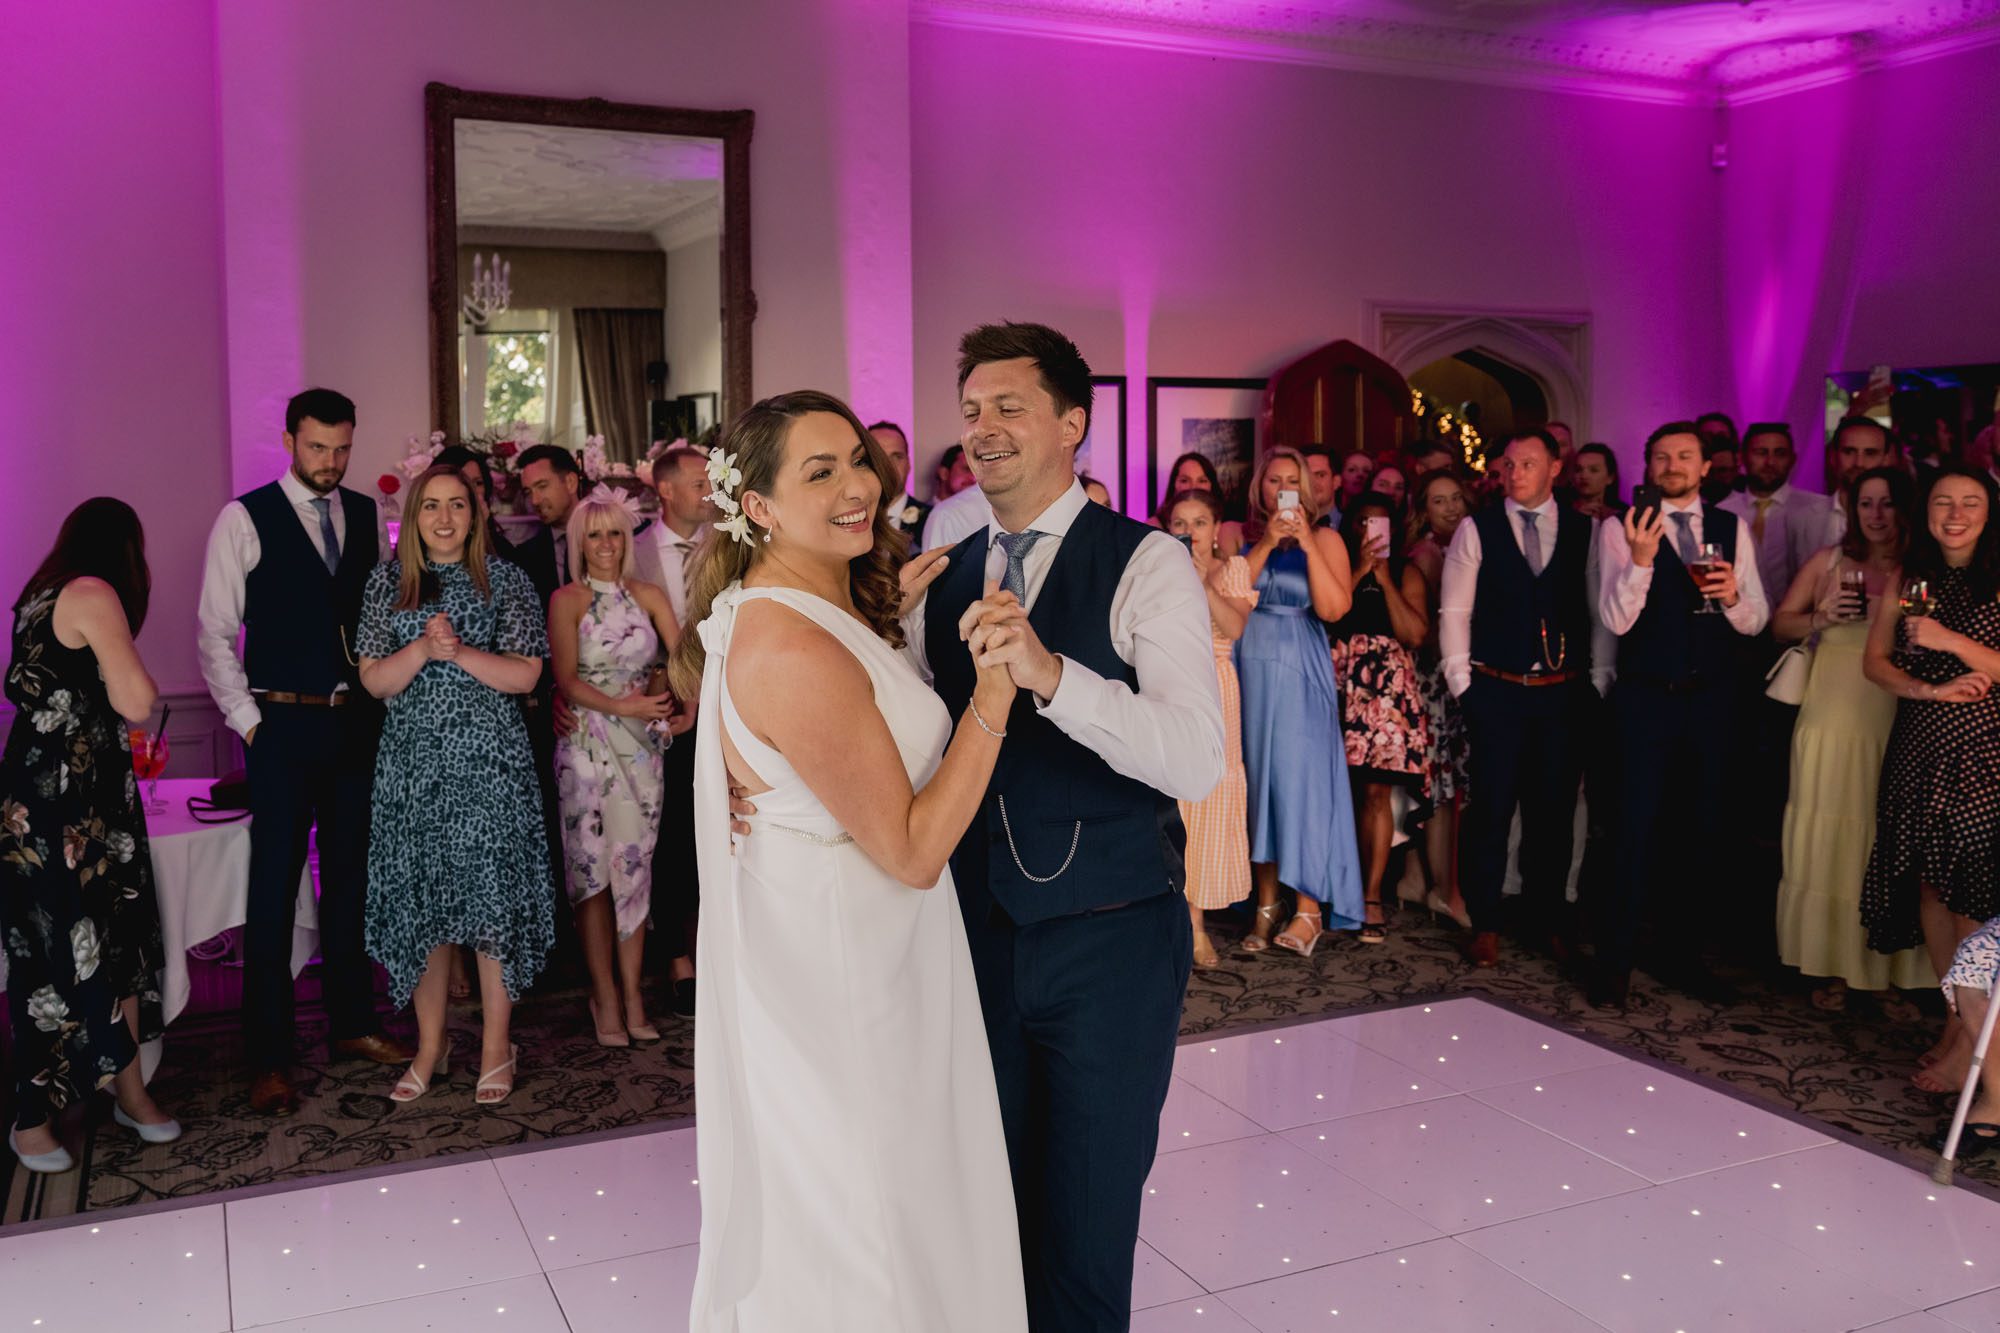 Bride and groom have their first dance together on their wedding day at Hartsfield Manor.